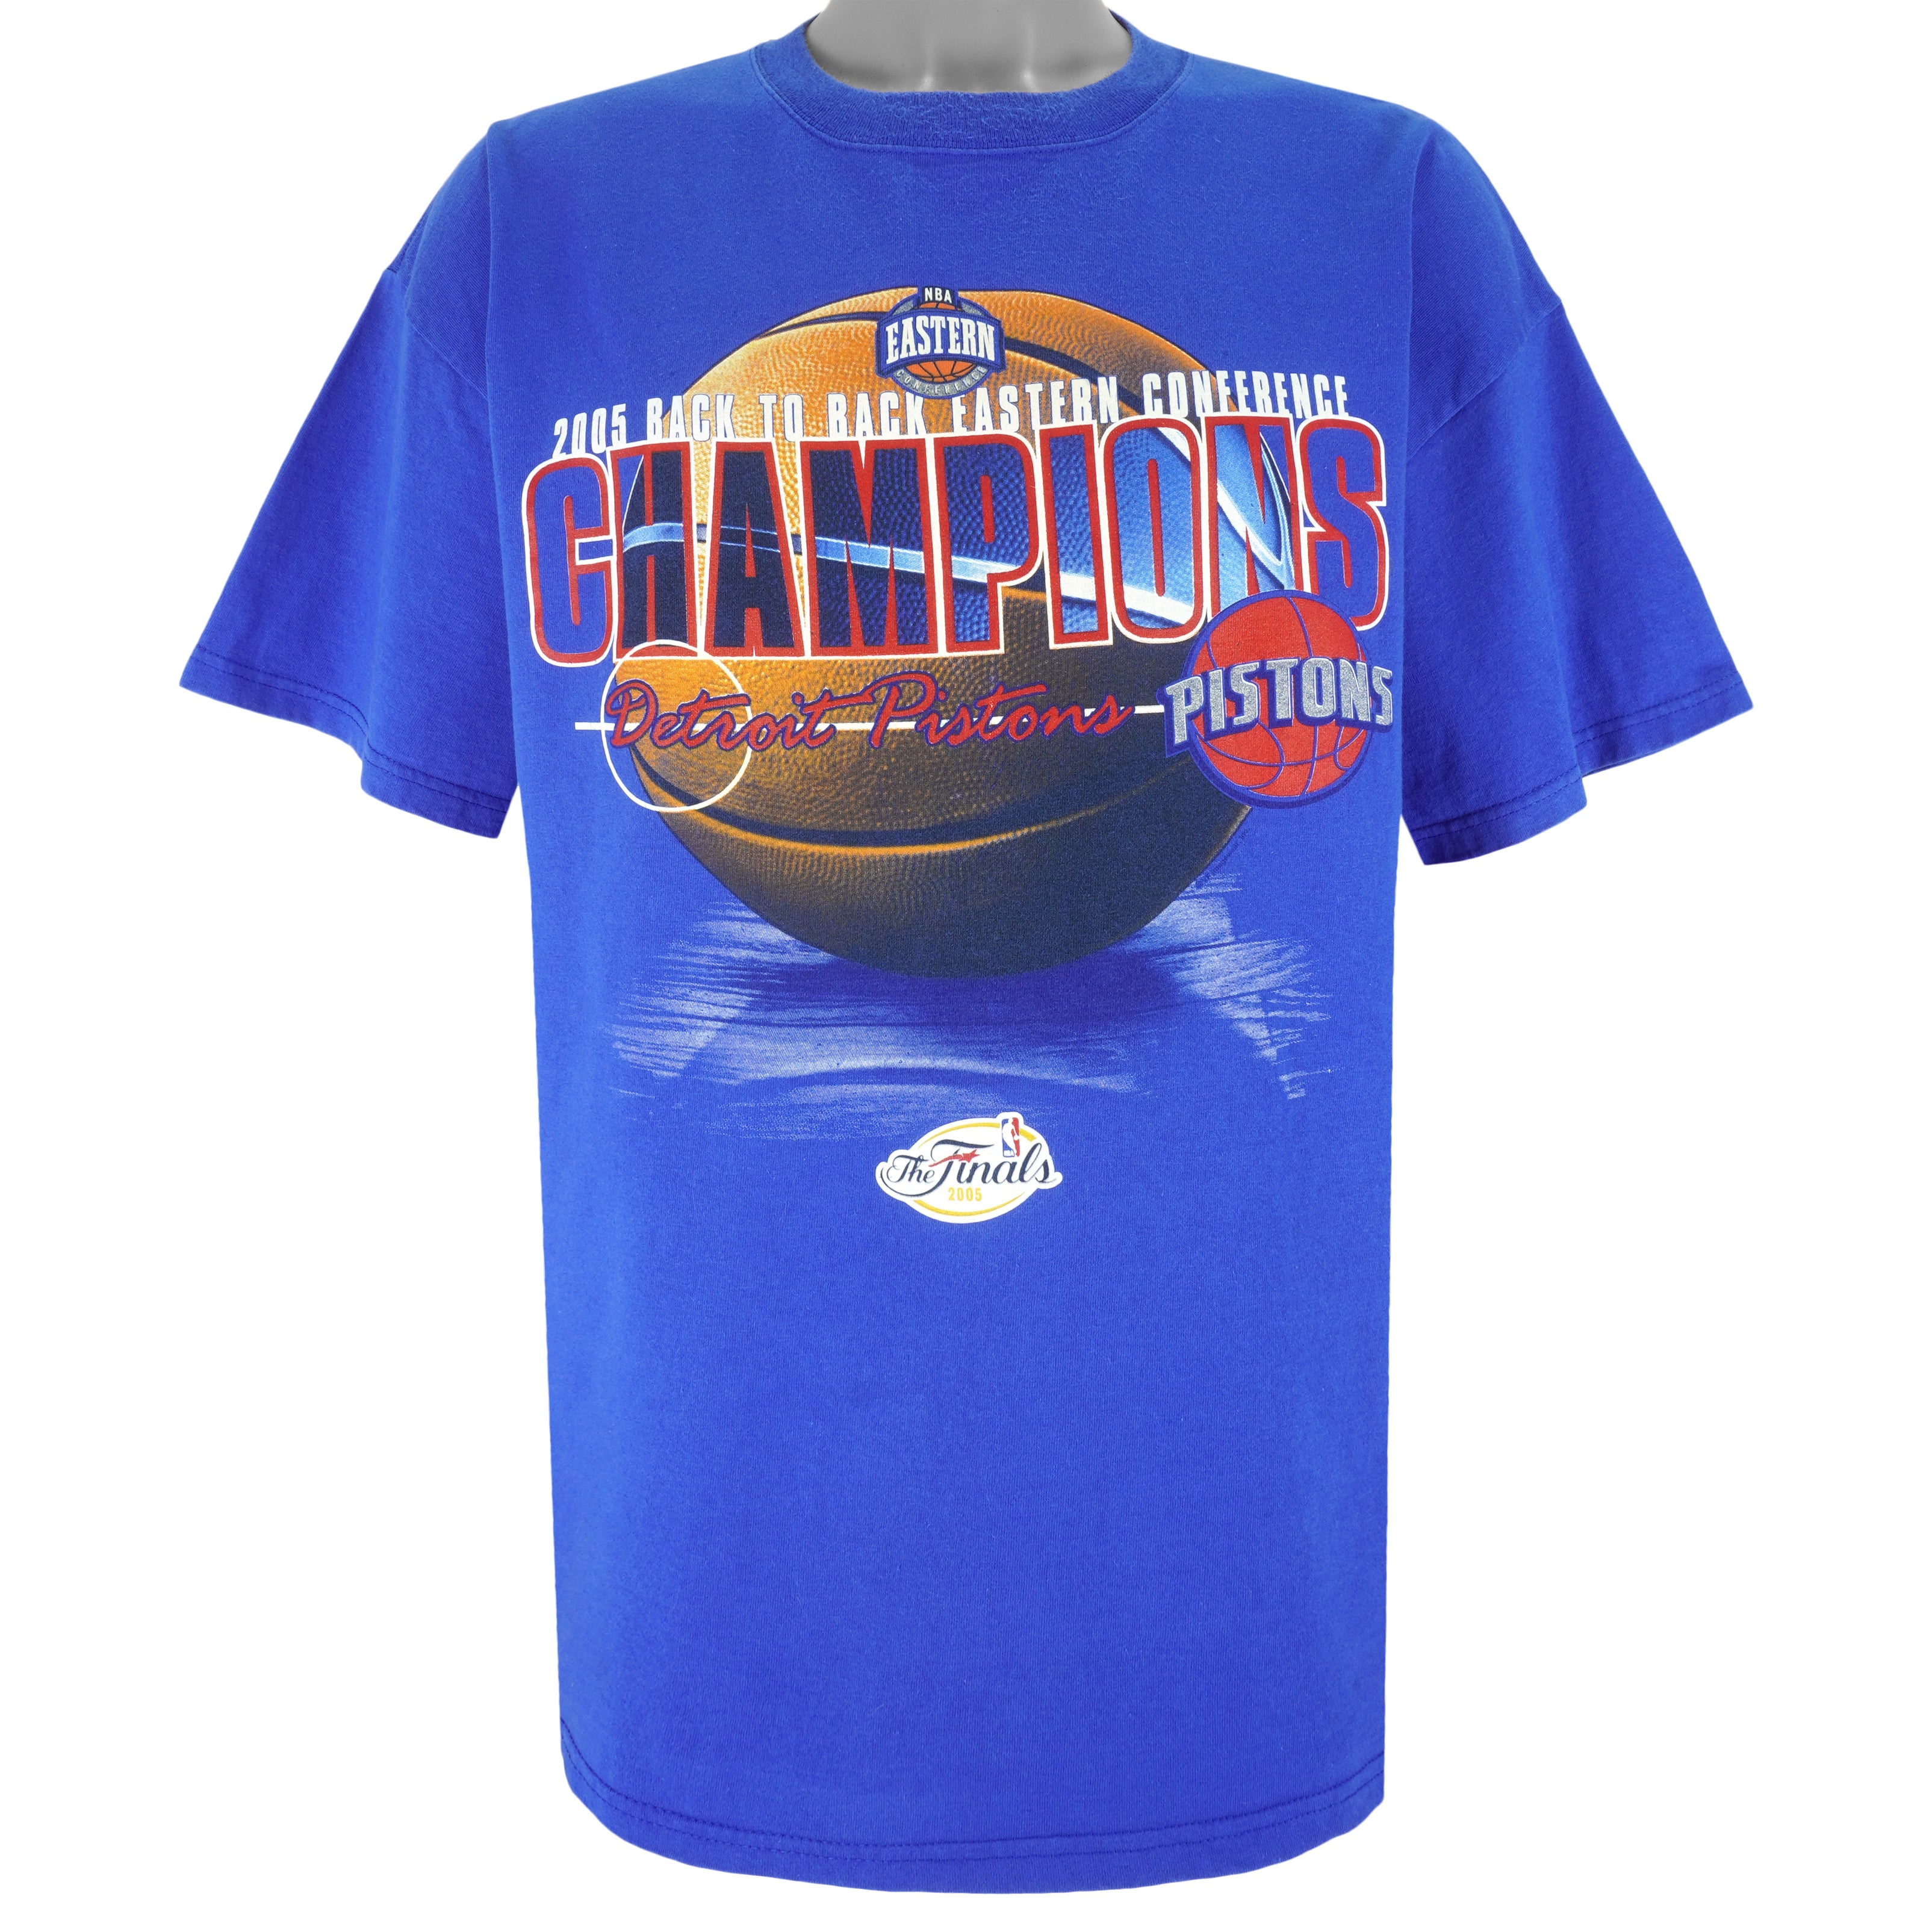 Vintage New York Knicks T Shirt Eastern Conference Champs 1994 90s